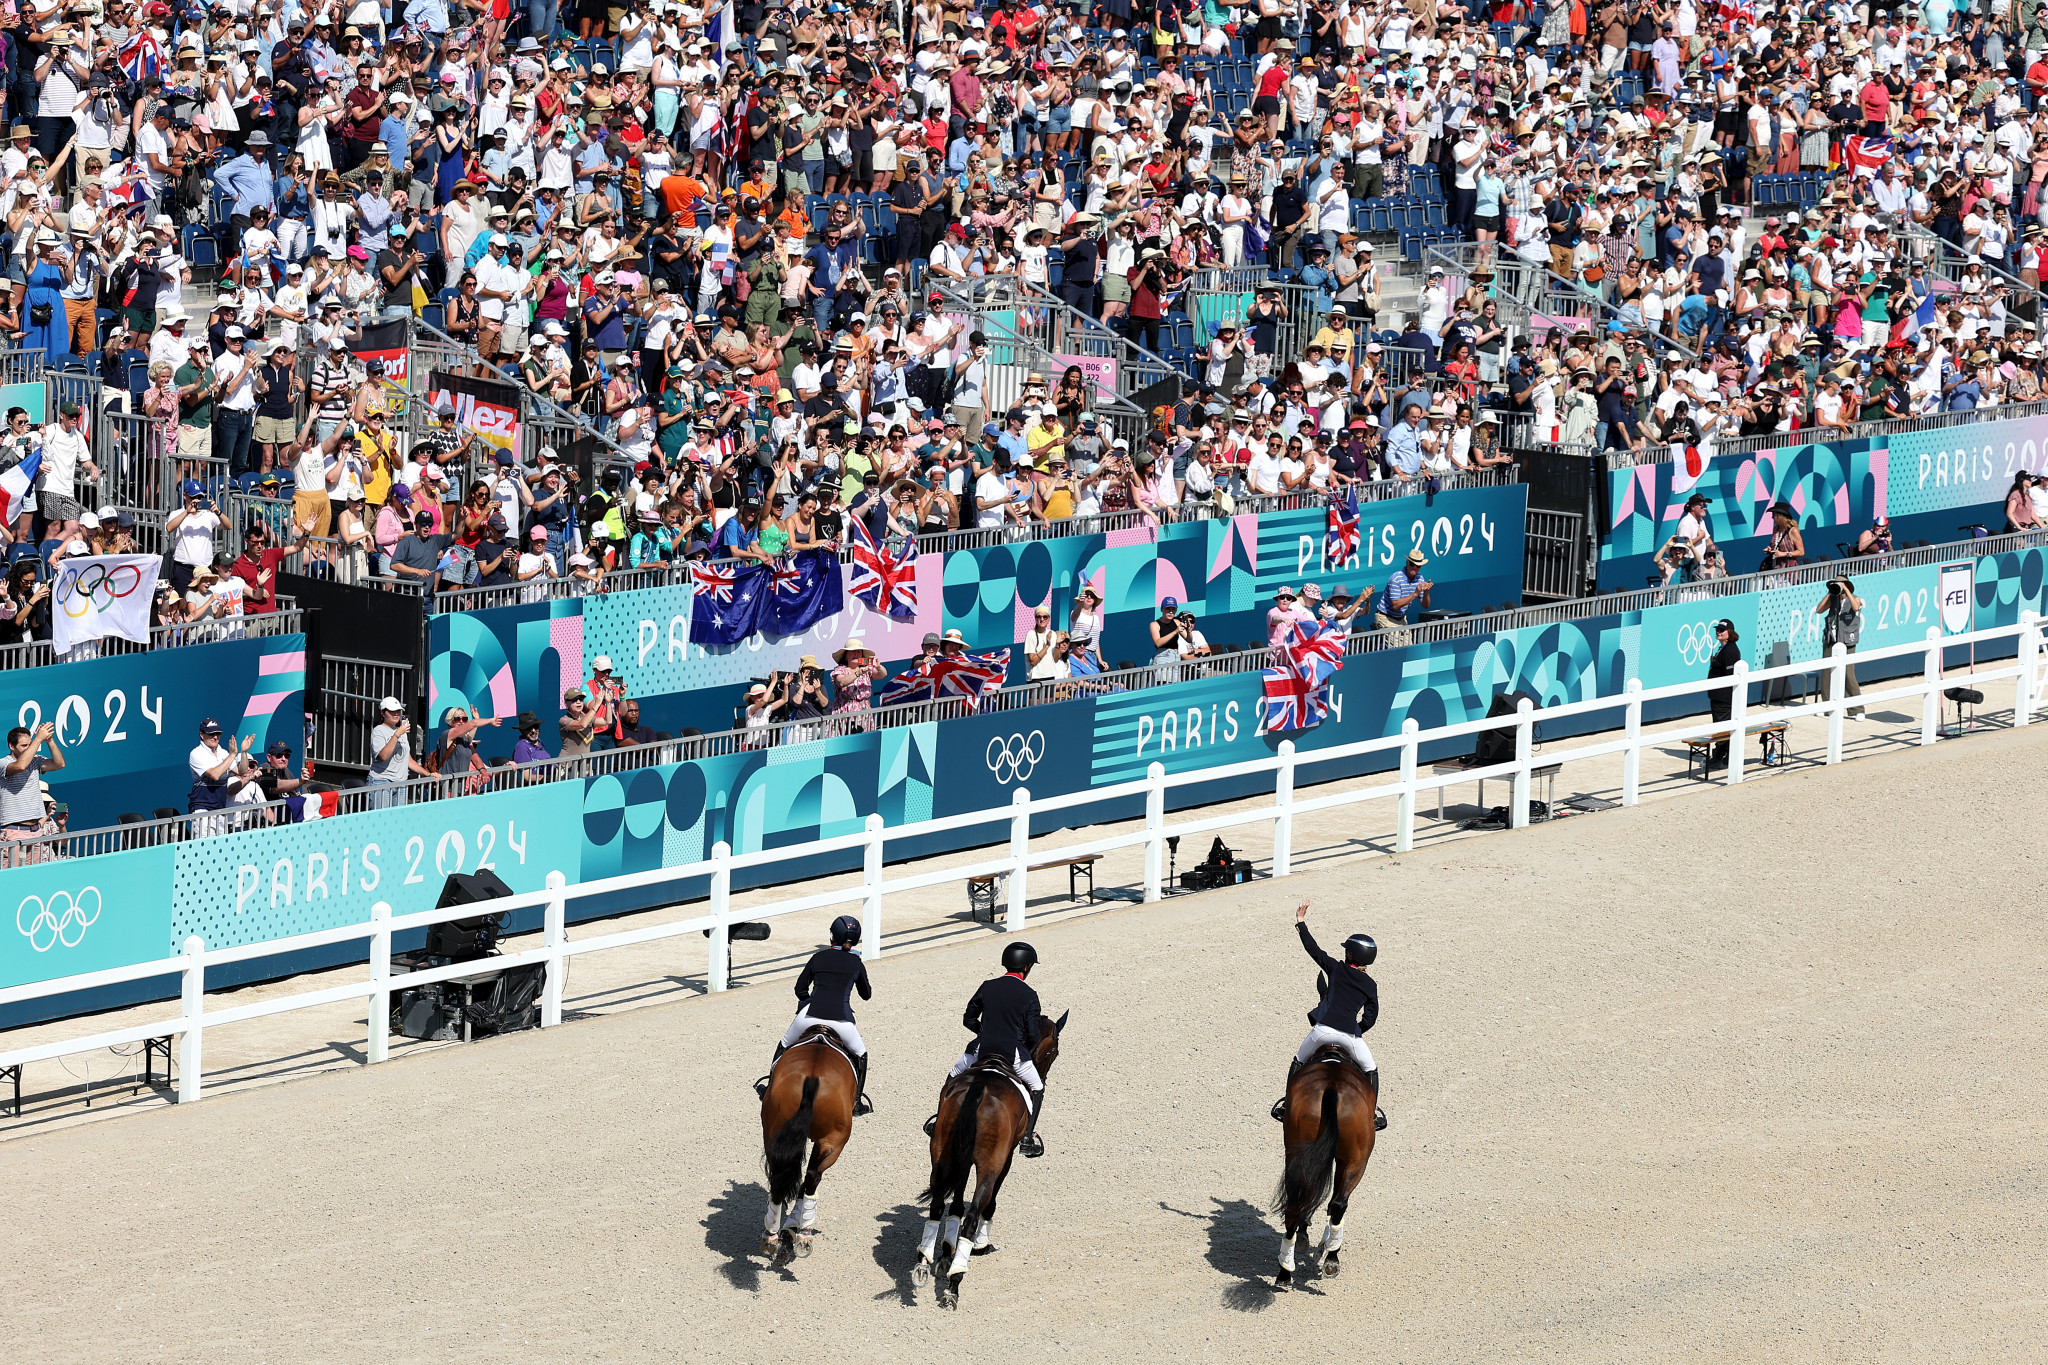 Gold medalists of Team GB at an equestrian event at the Paris 2024 Olympic Games. GETTY IMAGES